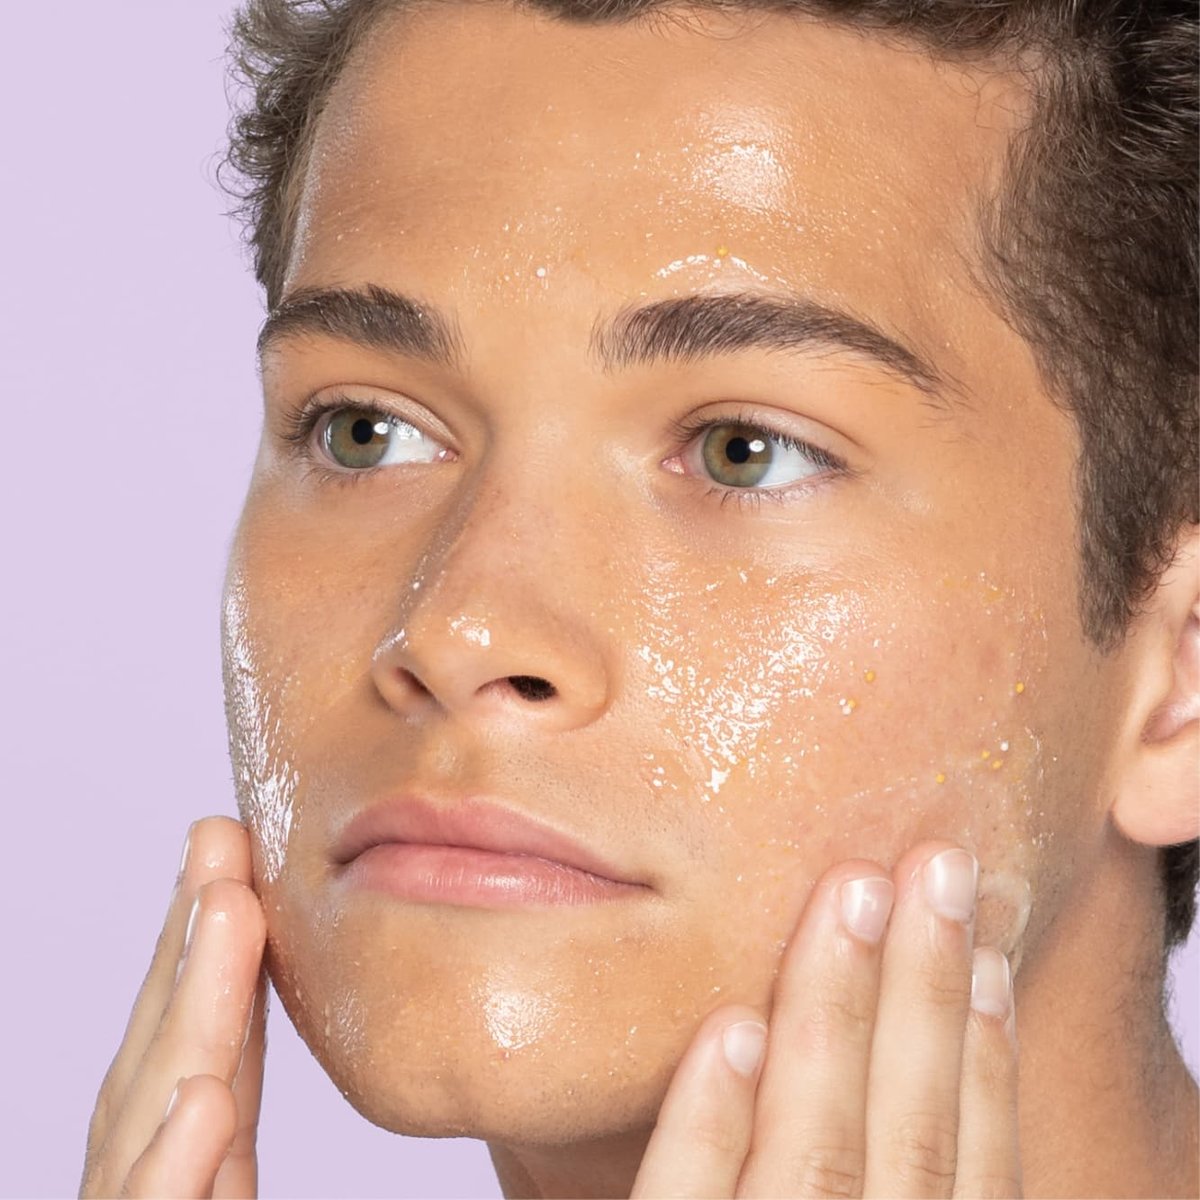 Young teen with hazel eyes and light brown hair applies lemon zesty scrub to cheeks in front of light purple background